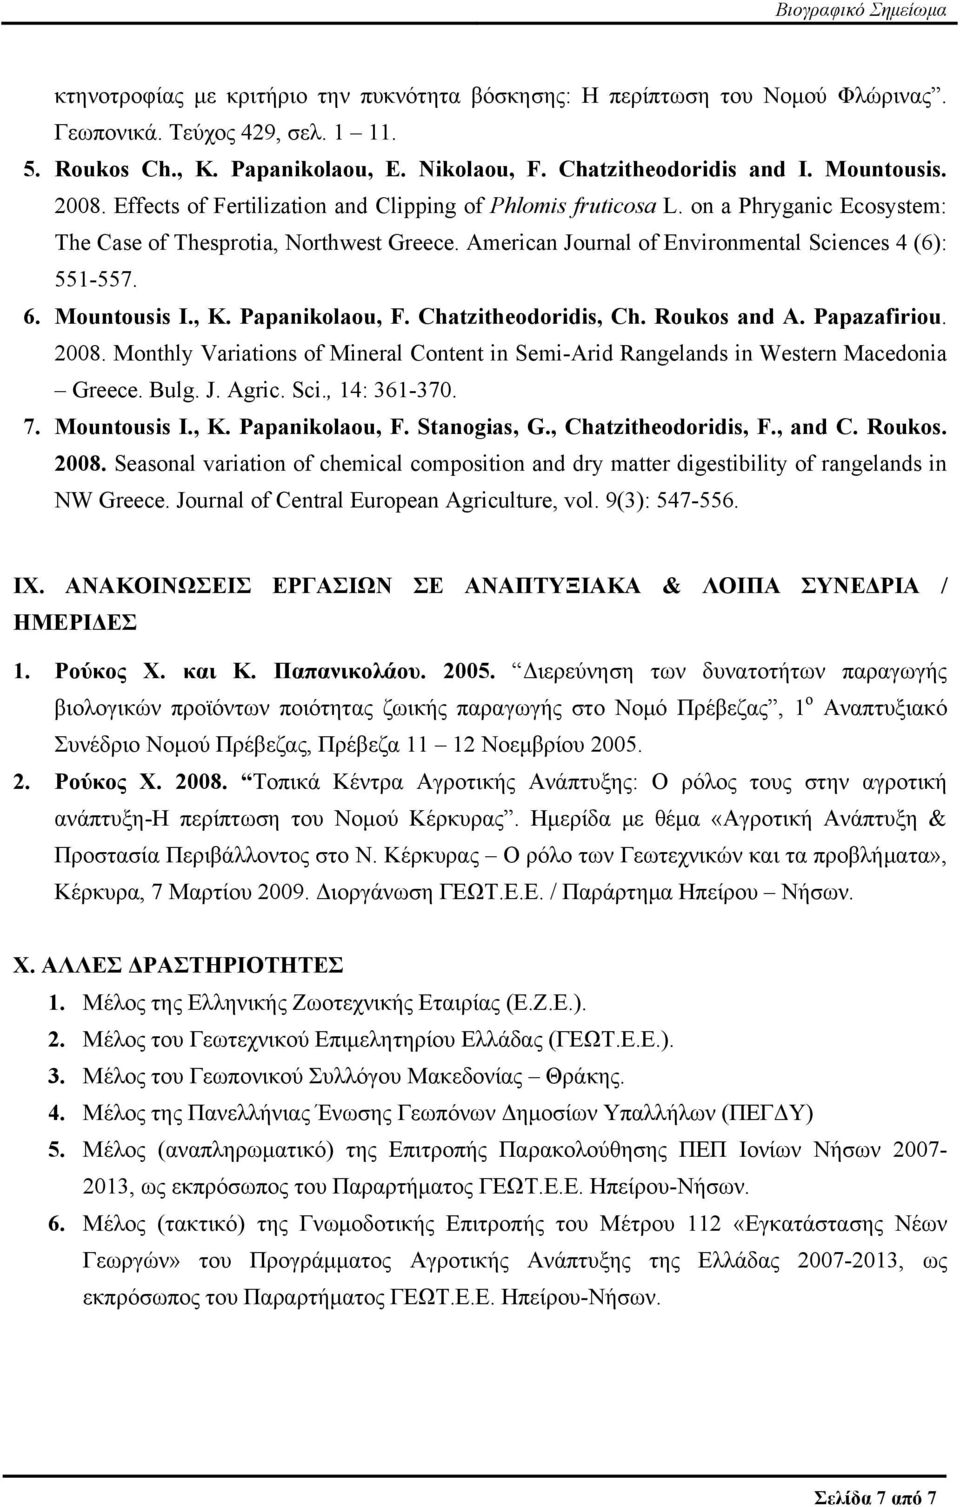 Mountousis I., K. Papanikolaou, F. Chatzitheodoridis, Ch. Roukos and A. Papazafiriou. 2008. Monthly Variations of Mineral Content in Semi-Arid Rangelands in Western Macedonia Greece. Bulg. J. Agric.